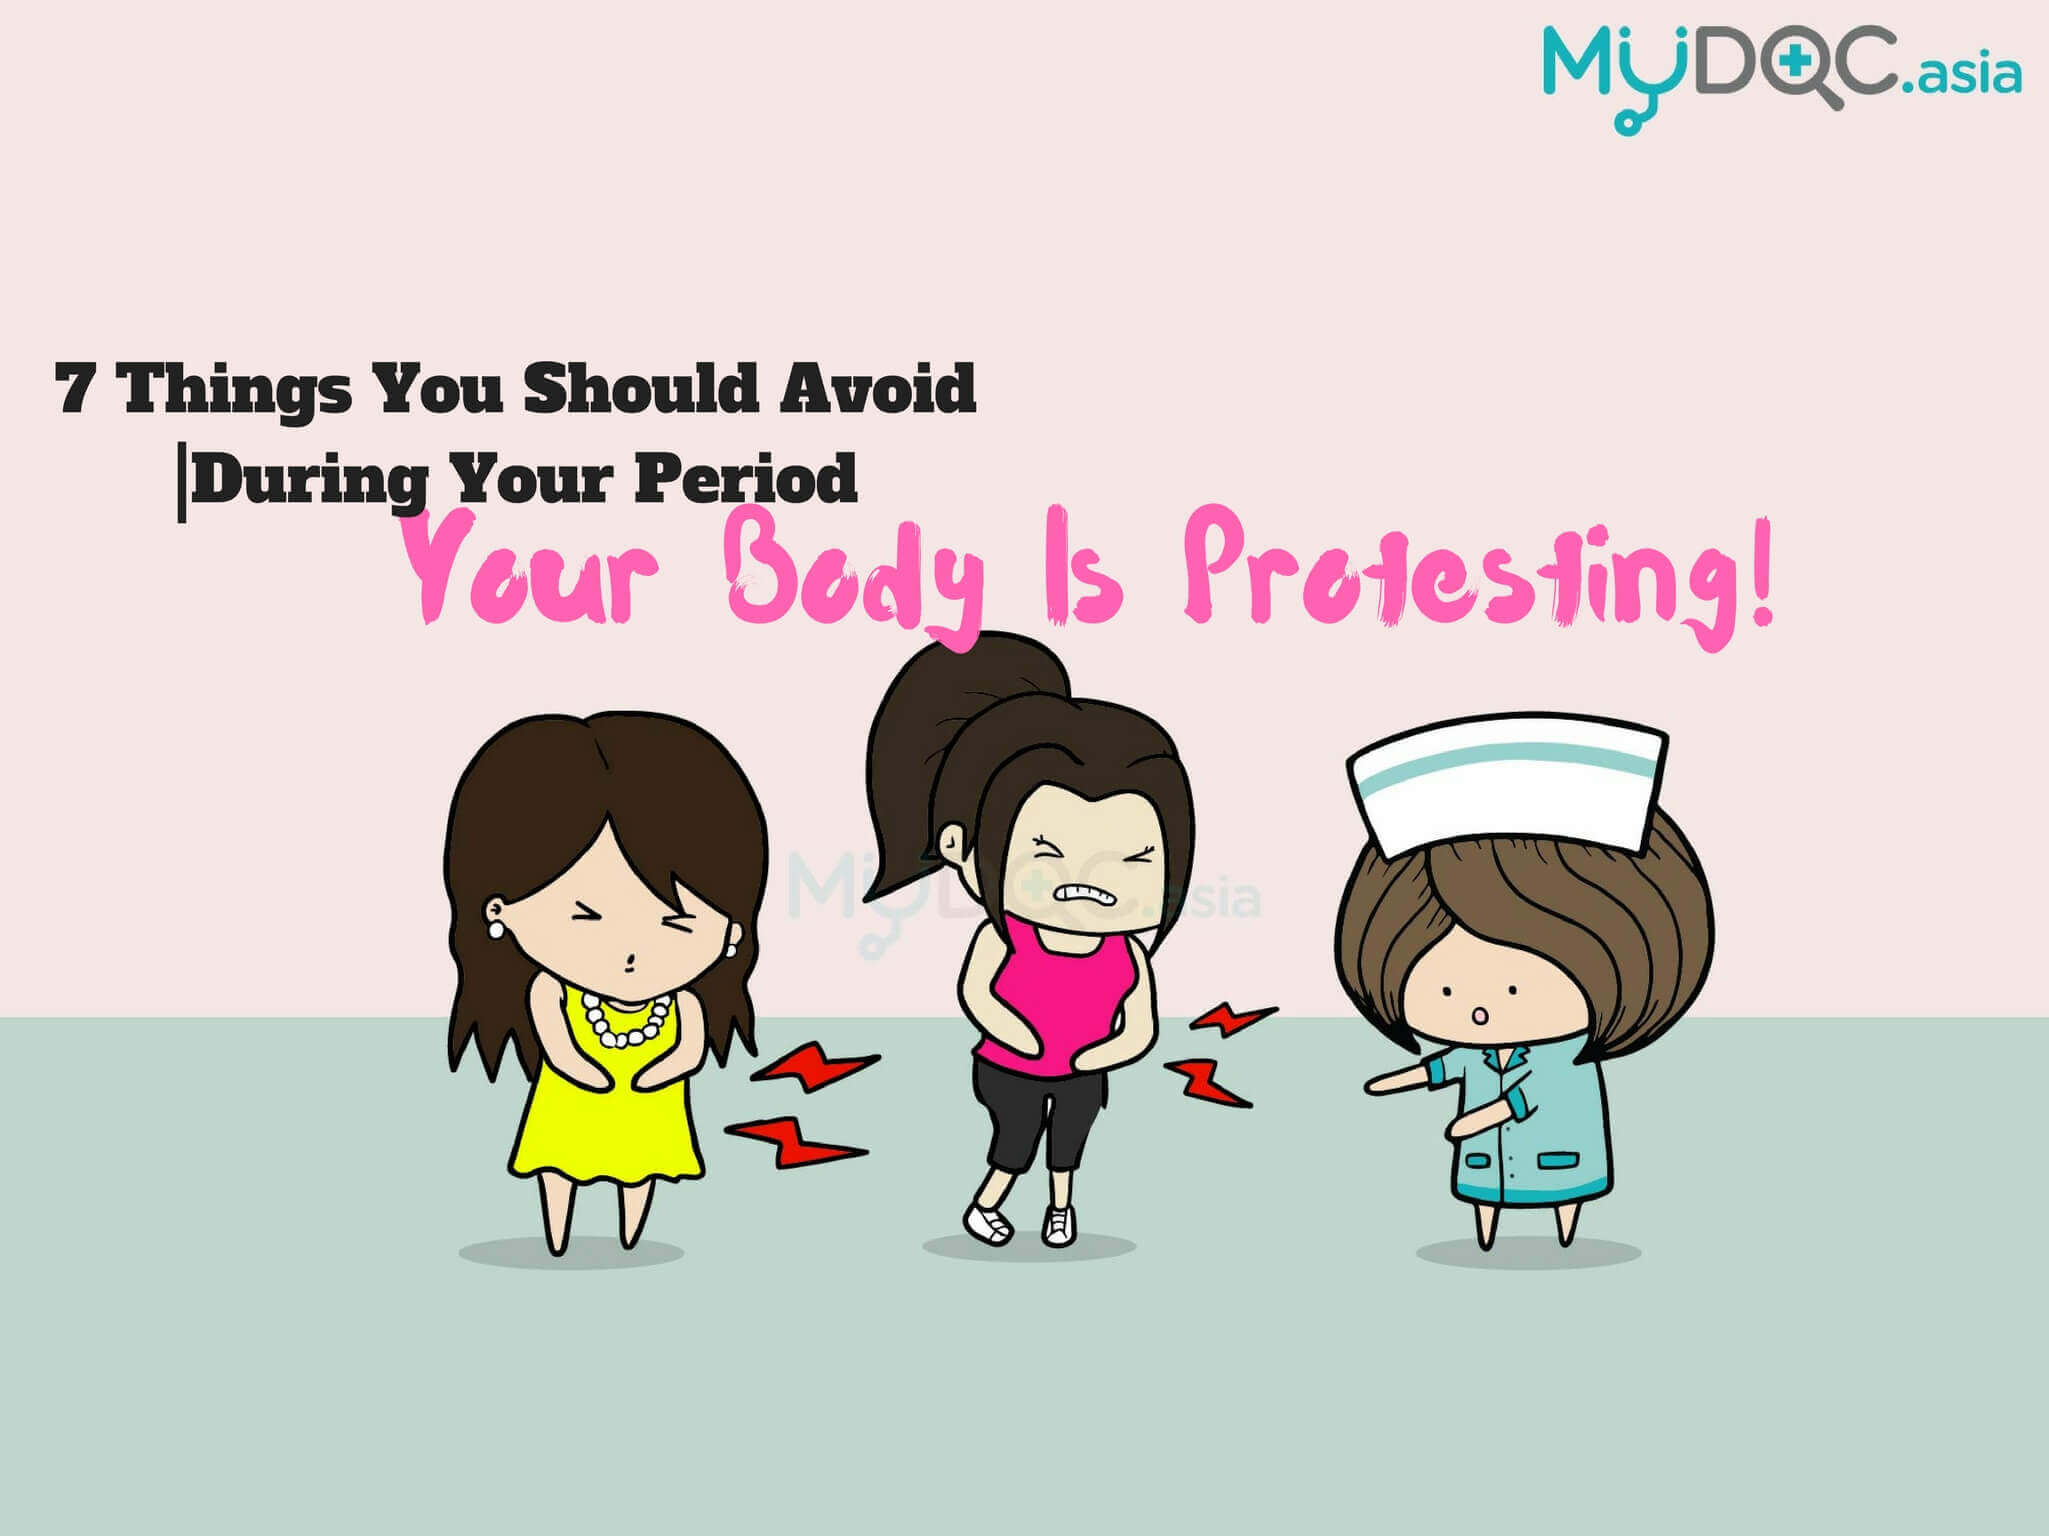 Your Body is Protesting! 7 Things You Should Avoid during Your Period